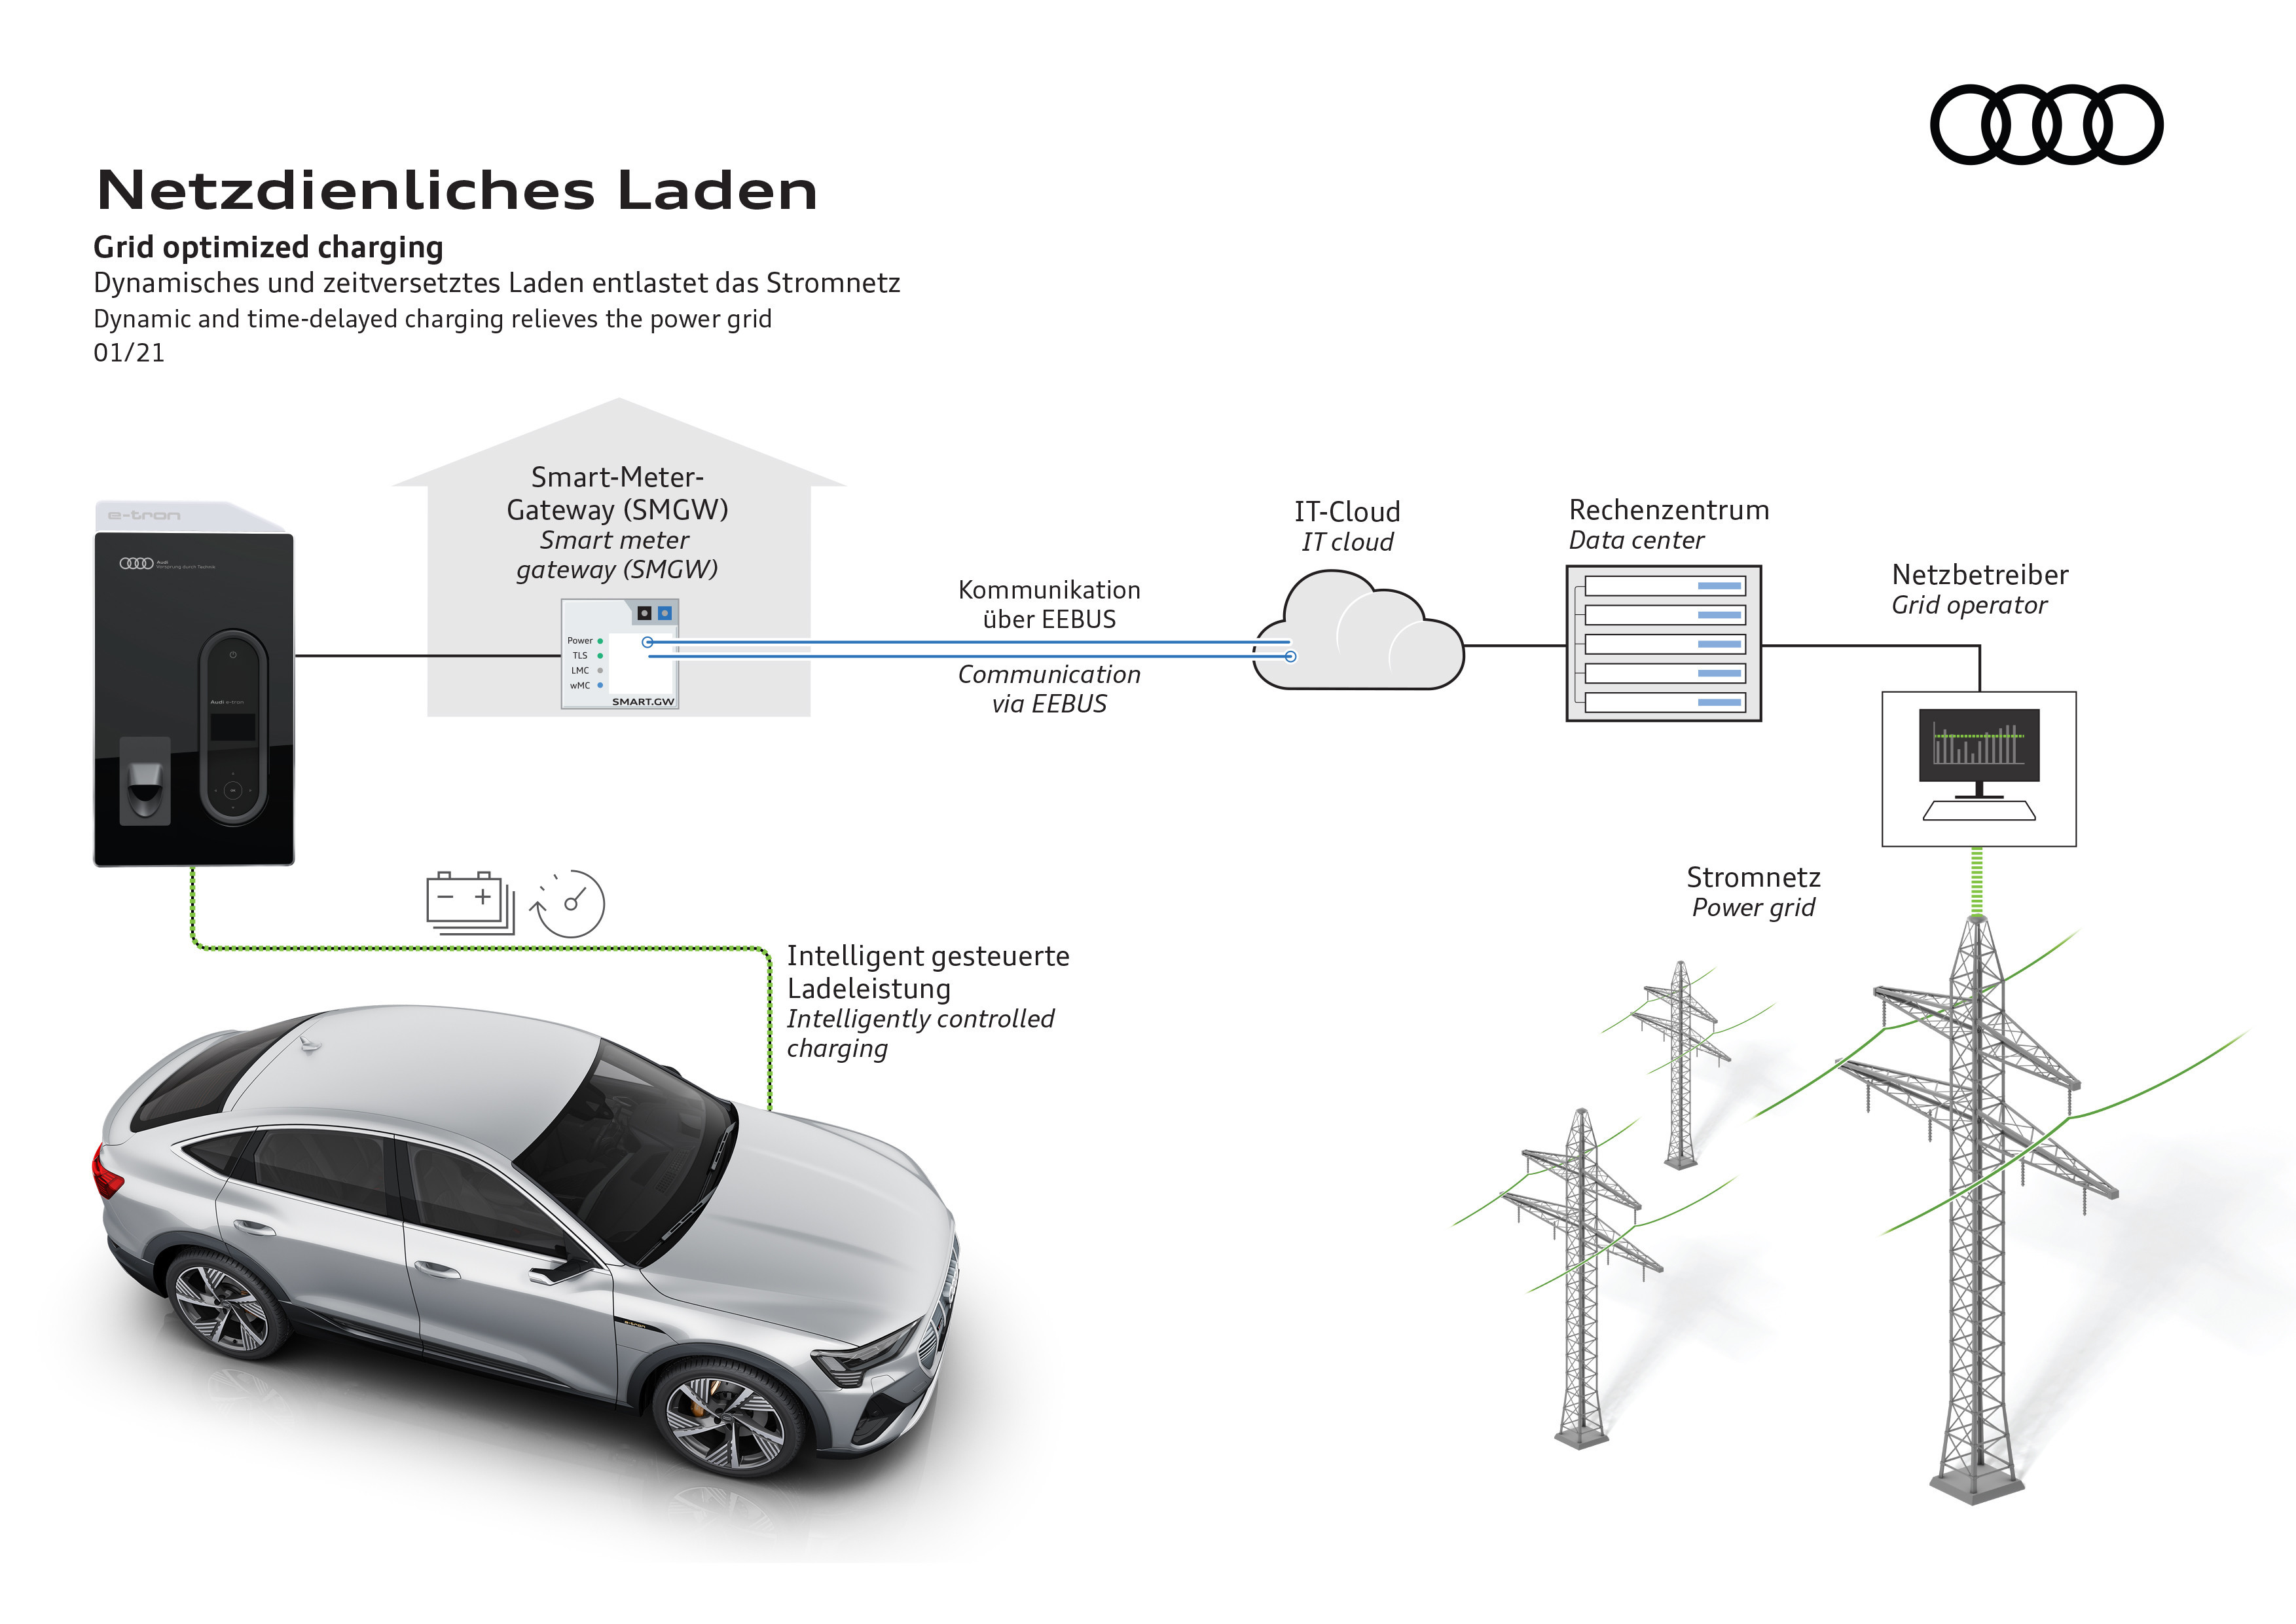 How smart electric vehicle charging can relieve pressure on the grid